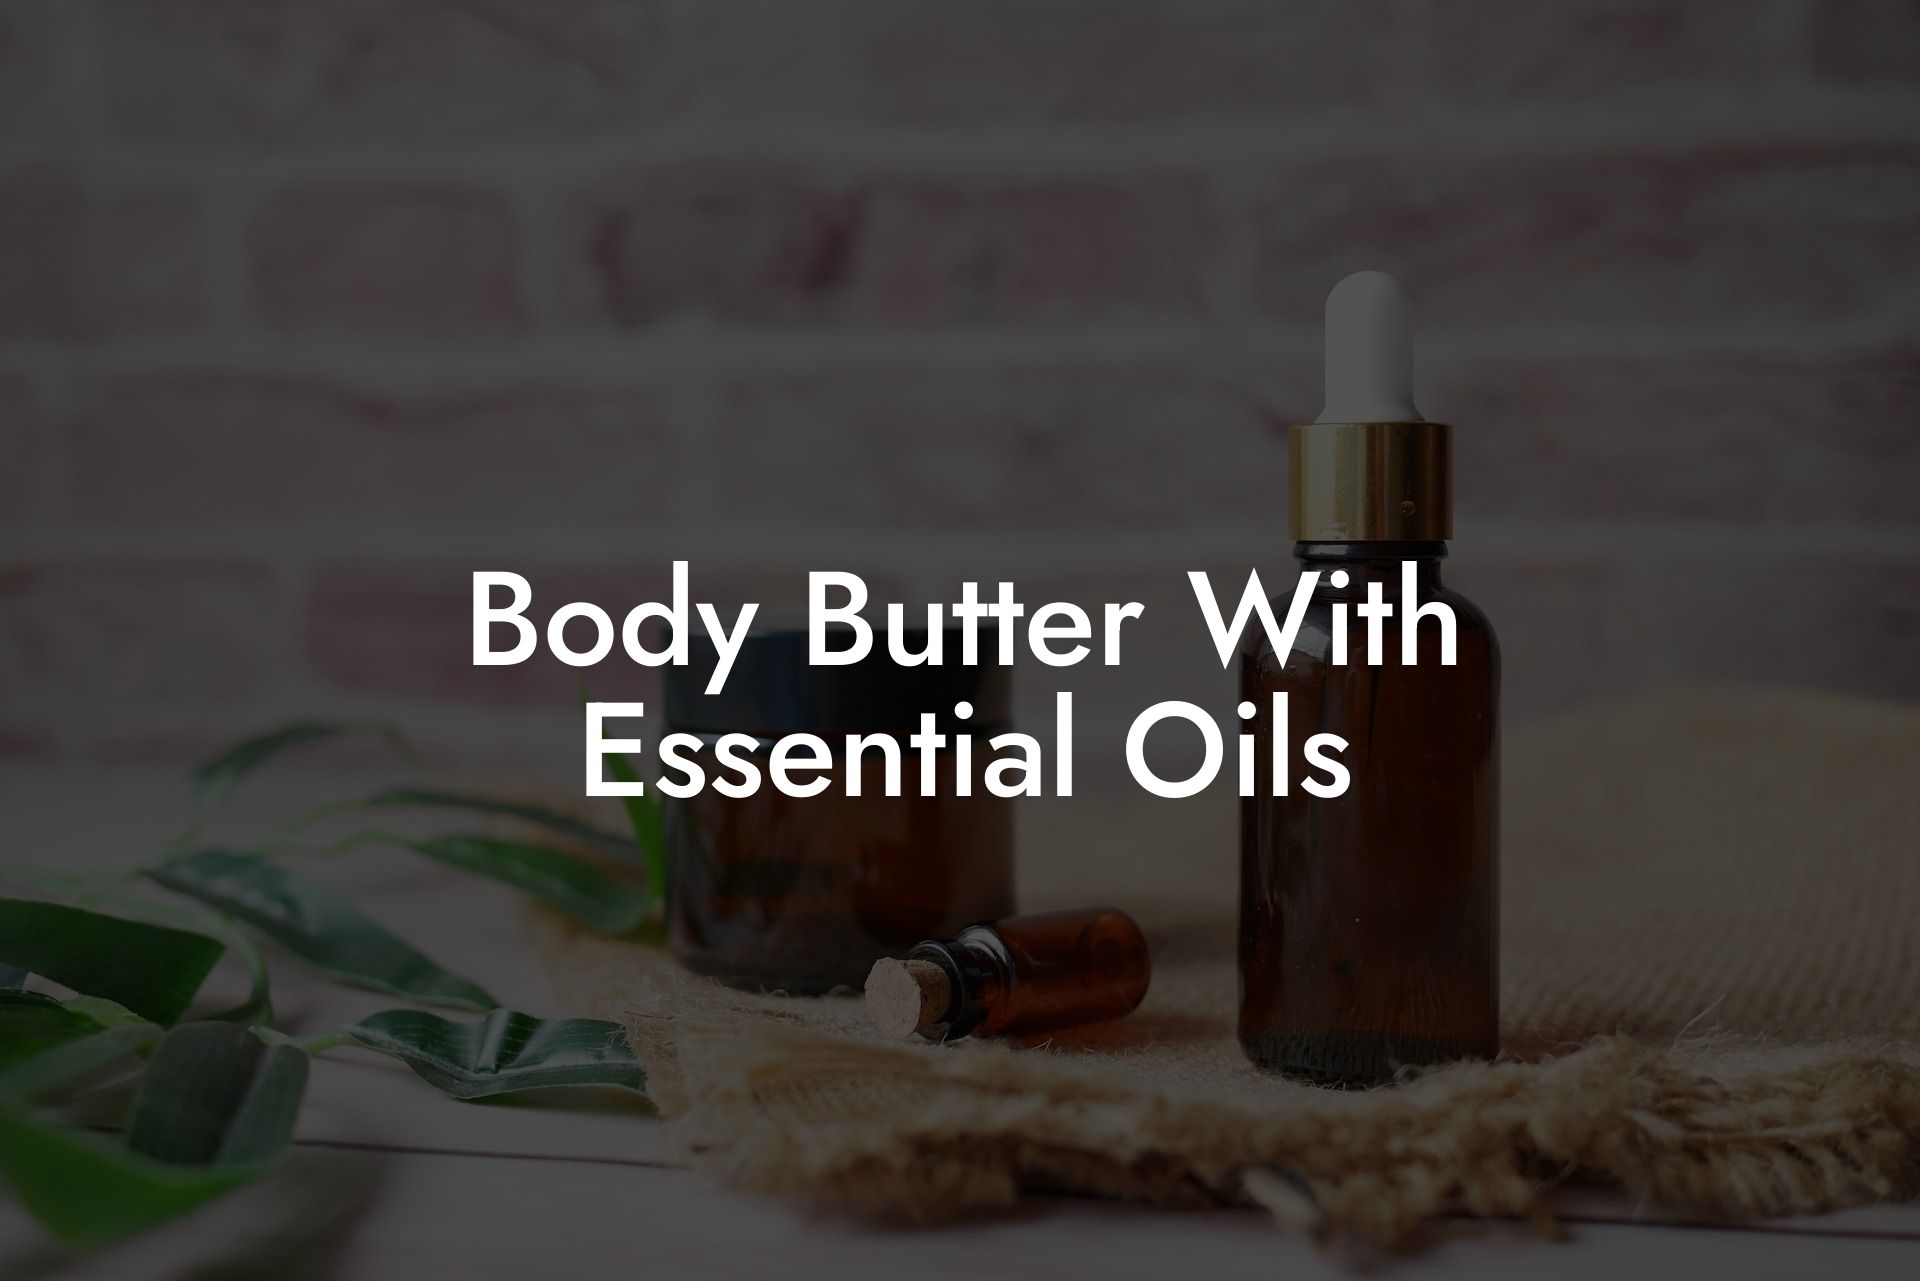 Body Butter With Essential Oils